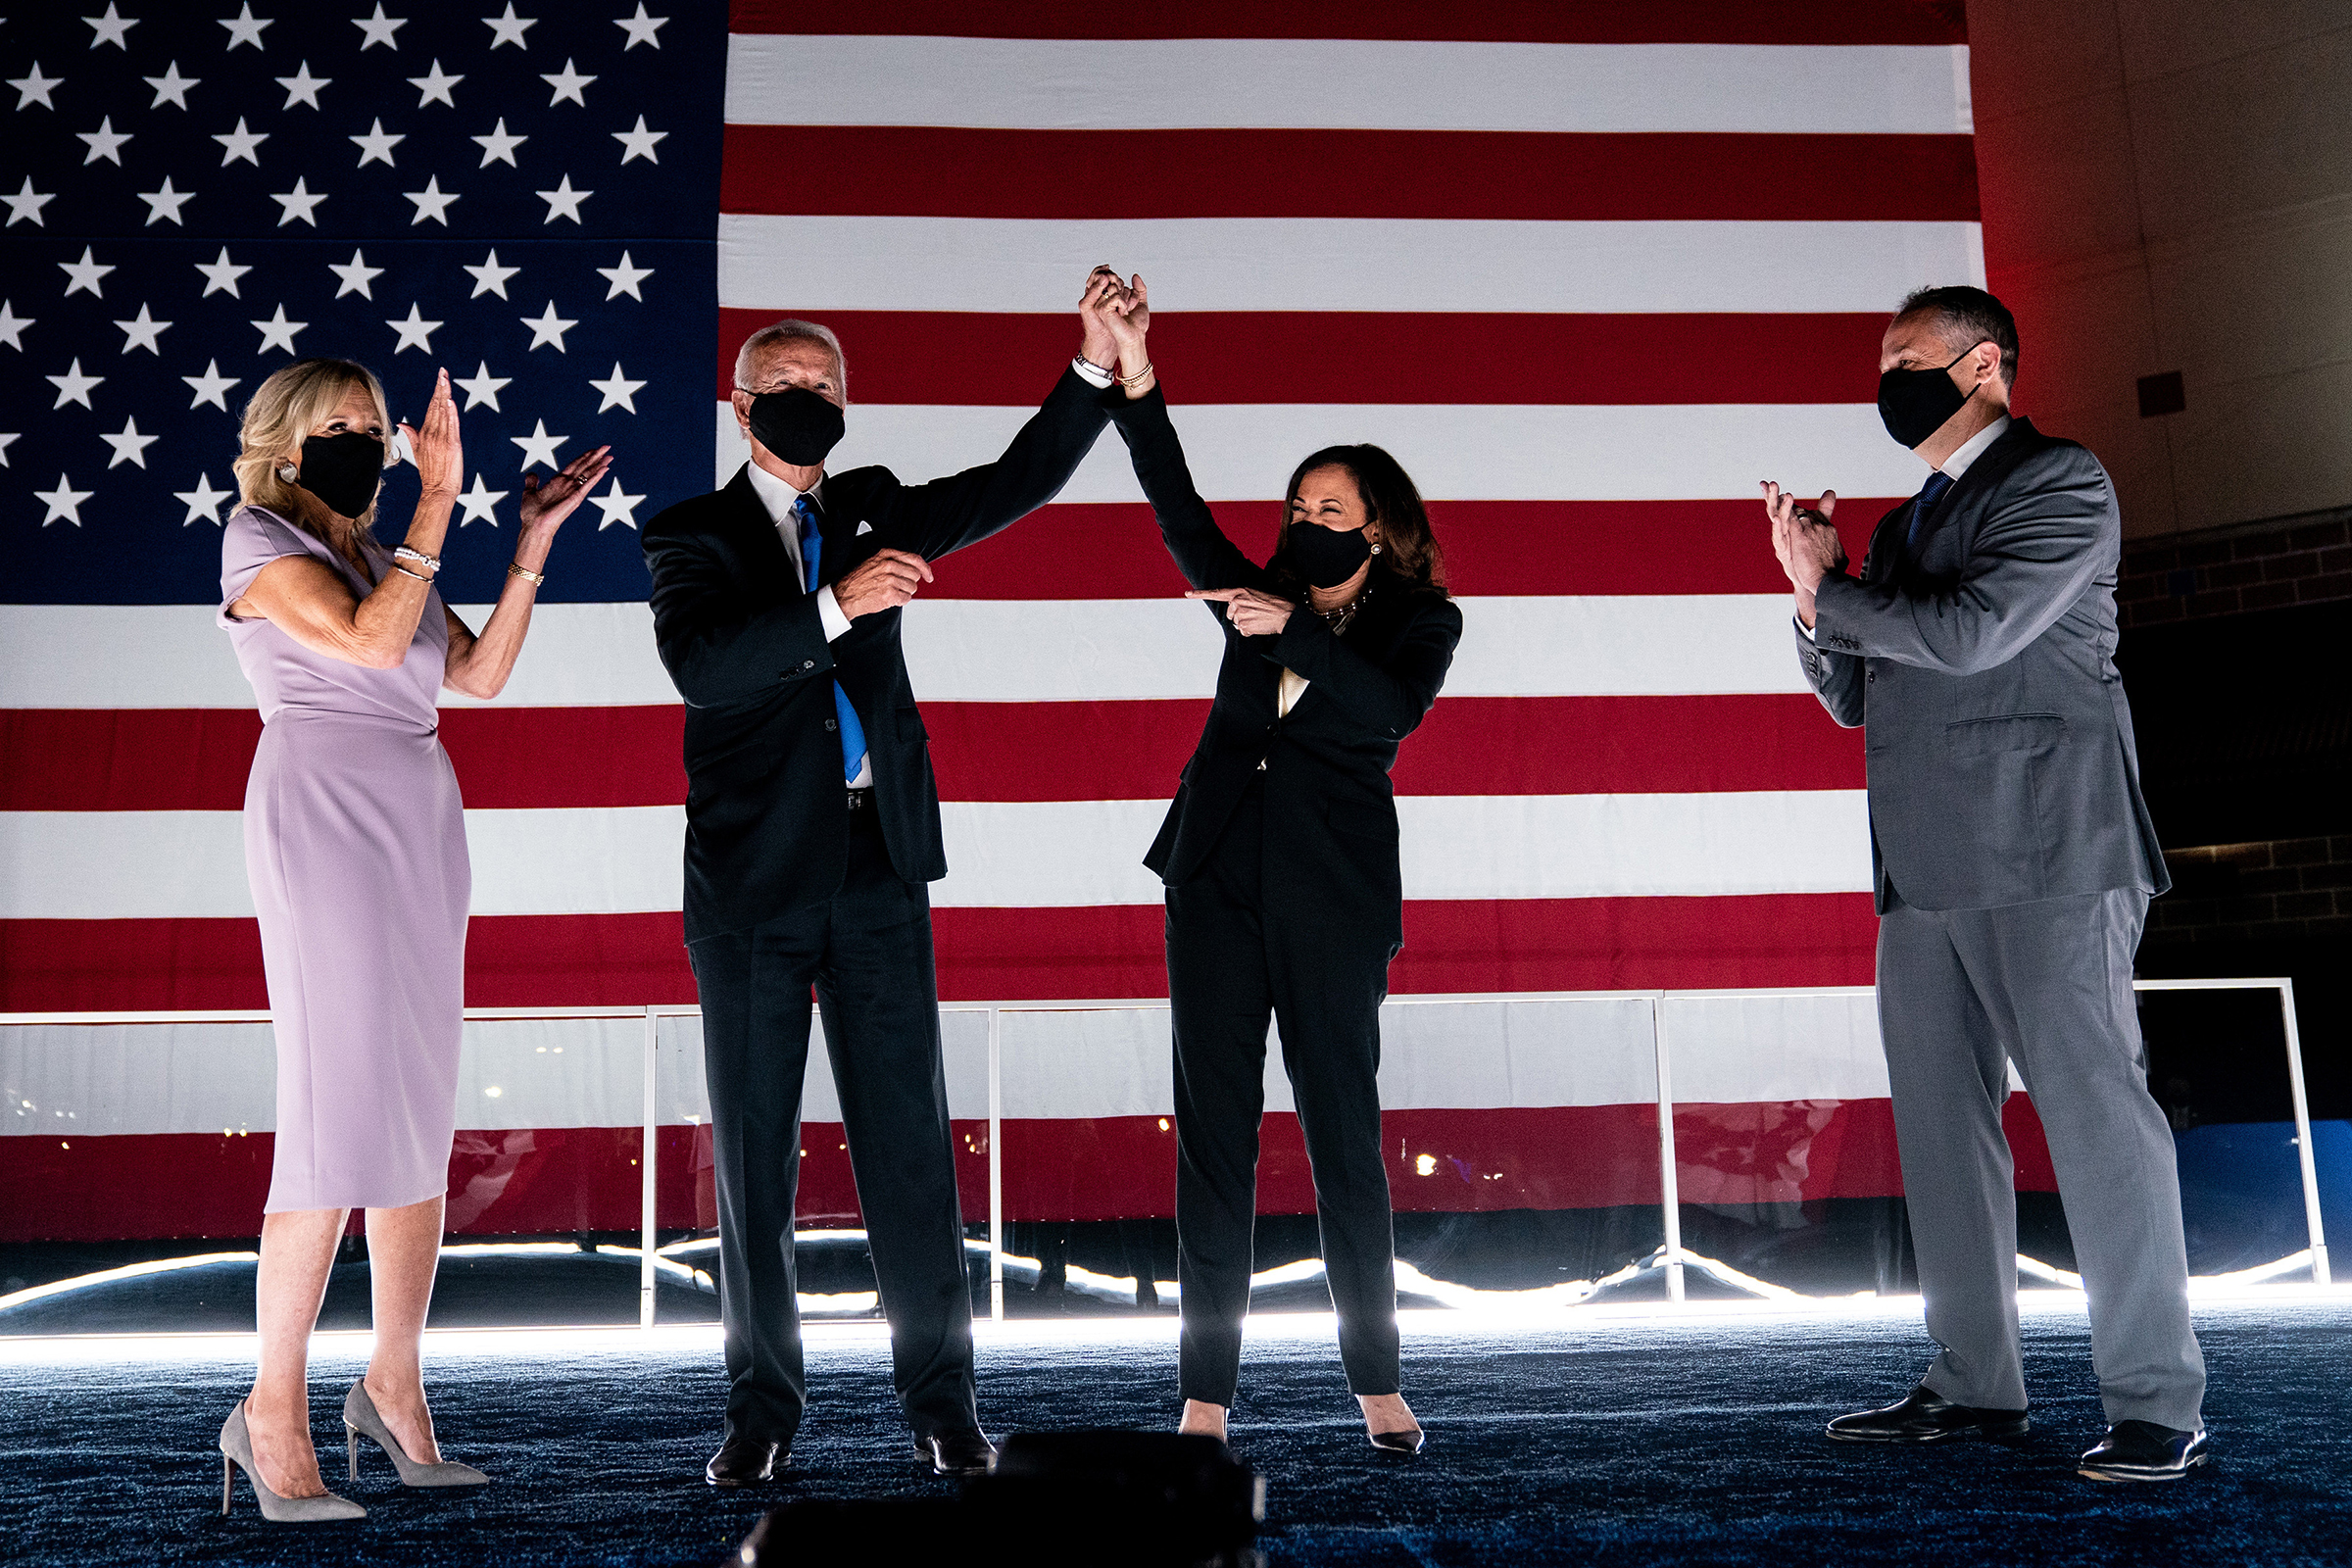 Joe Biden and Sen. Kamala Harris are applauded by their spouses, Jill Biden and Douglas Emhoff, shortly after Biden accepted his party's presidential nomination during the Democratic National Convention in Wilmington, Del., on Aug. 20, 2020. (Erin Schaff—The New York Times/Redux)